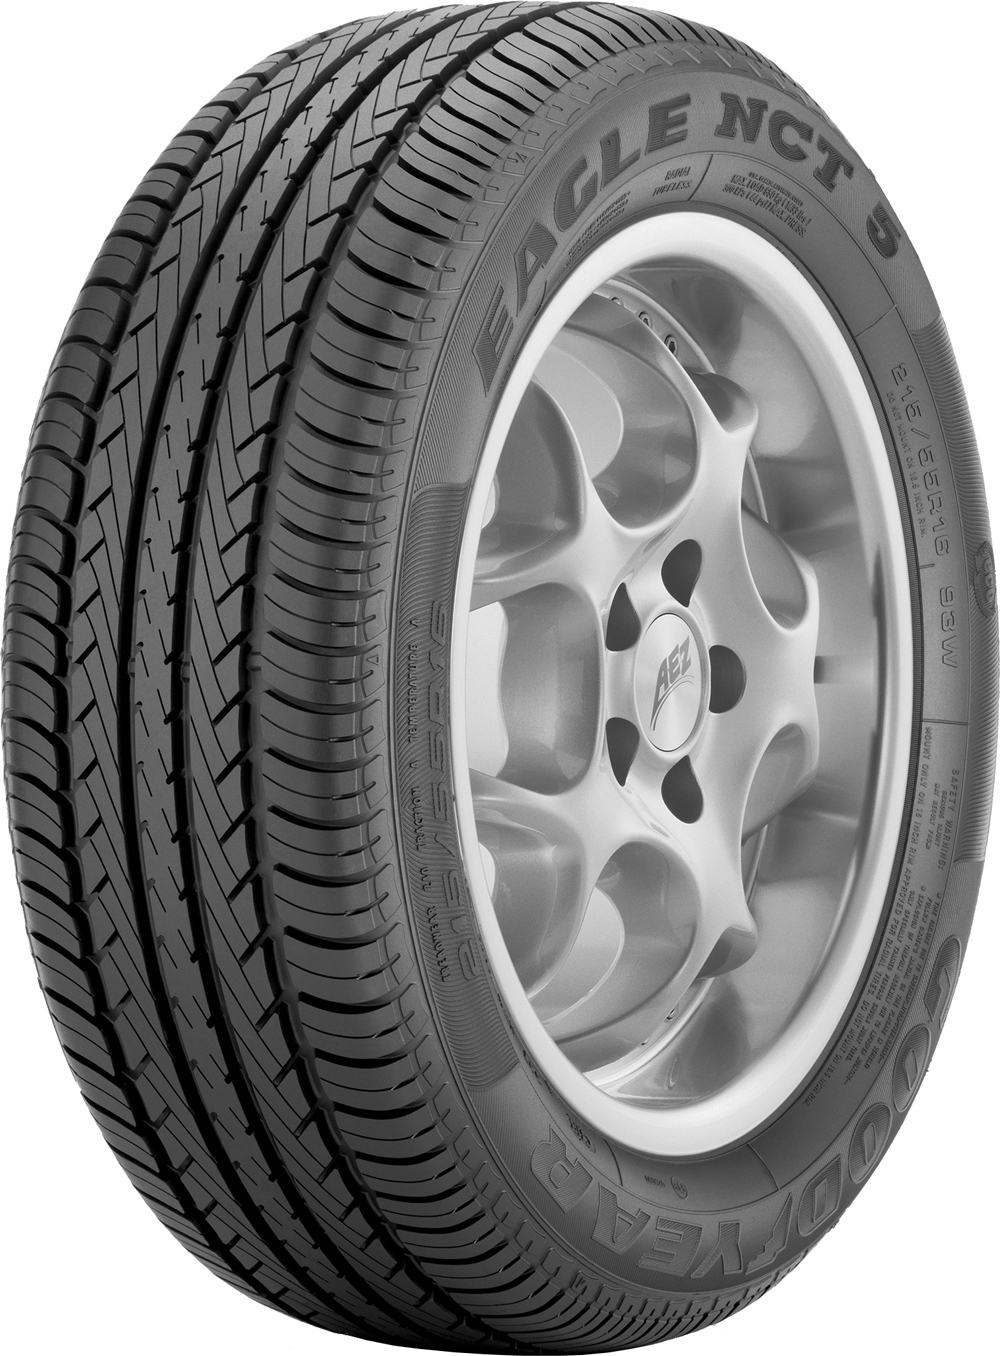 Anvelope auto GOODYEAR EAGLE NCT5 RFT 205/50 R17 89V